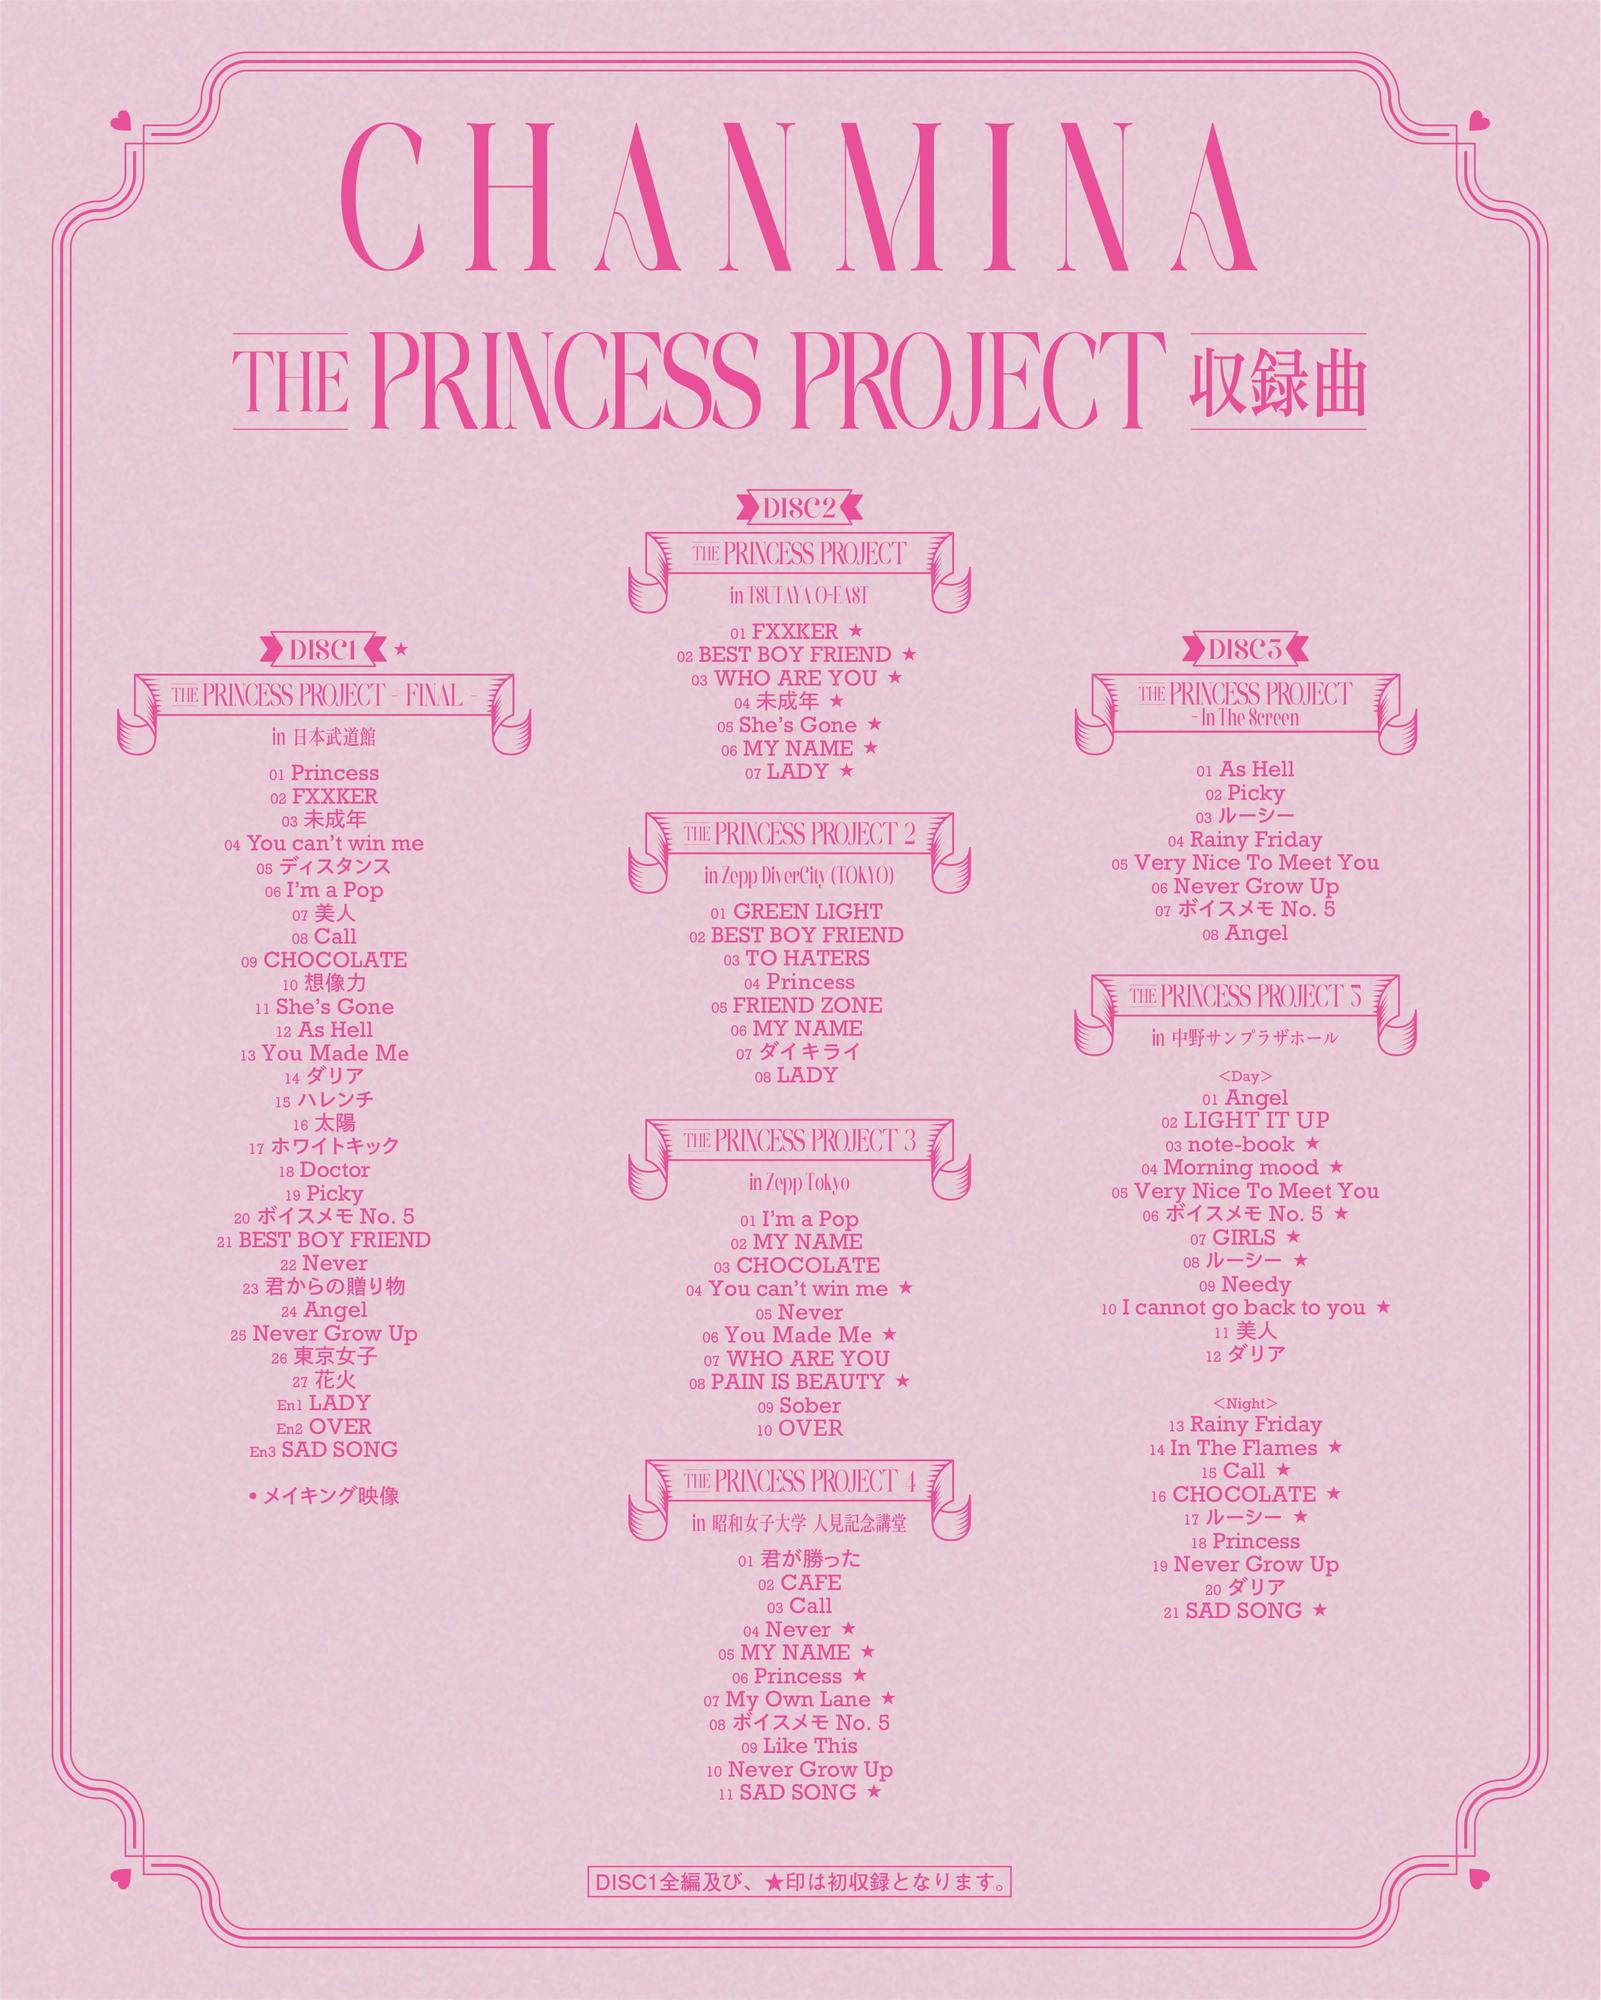 THE PRINCESS PROJECT』／『THE PRINCESS PROJECT - FINAL - 』の収録 